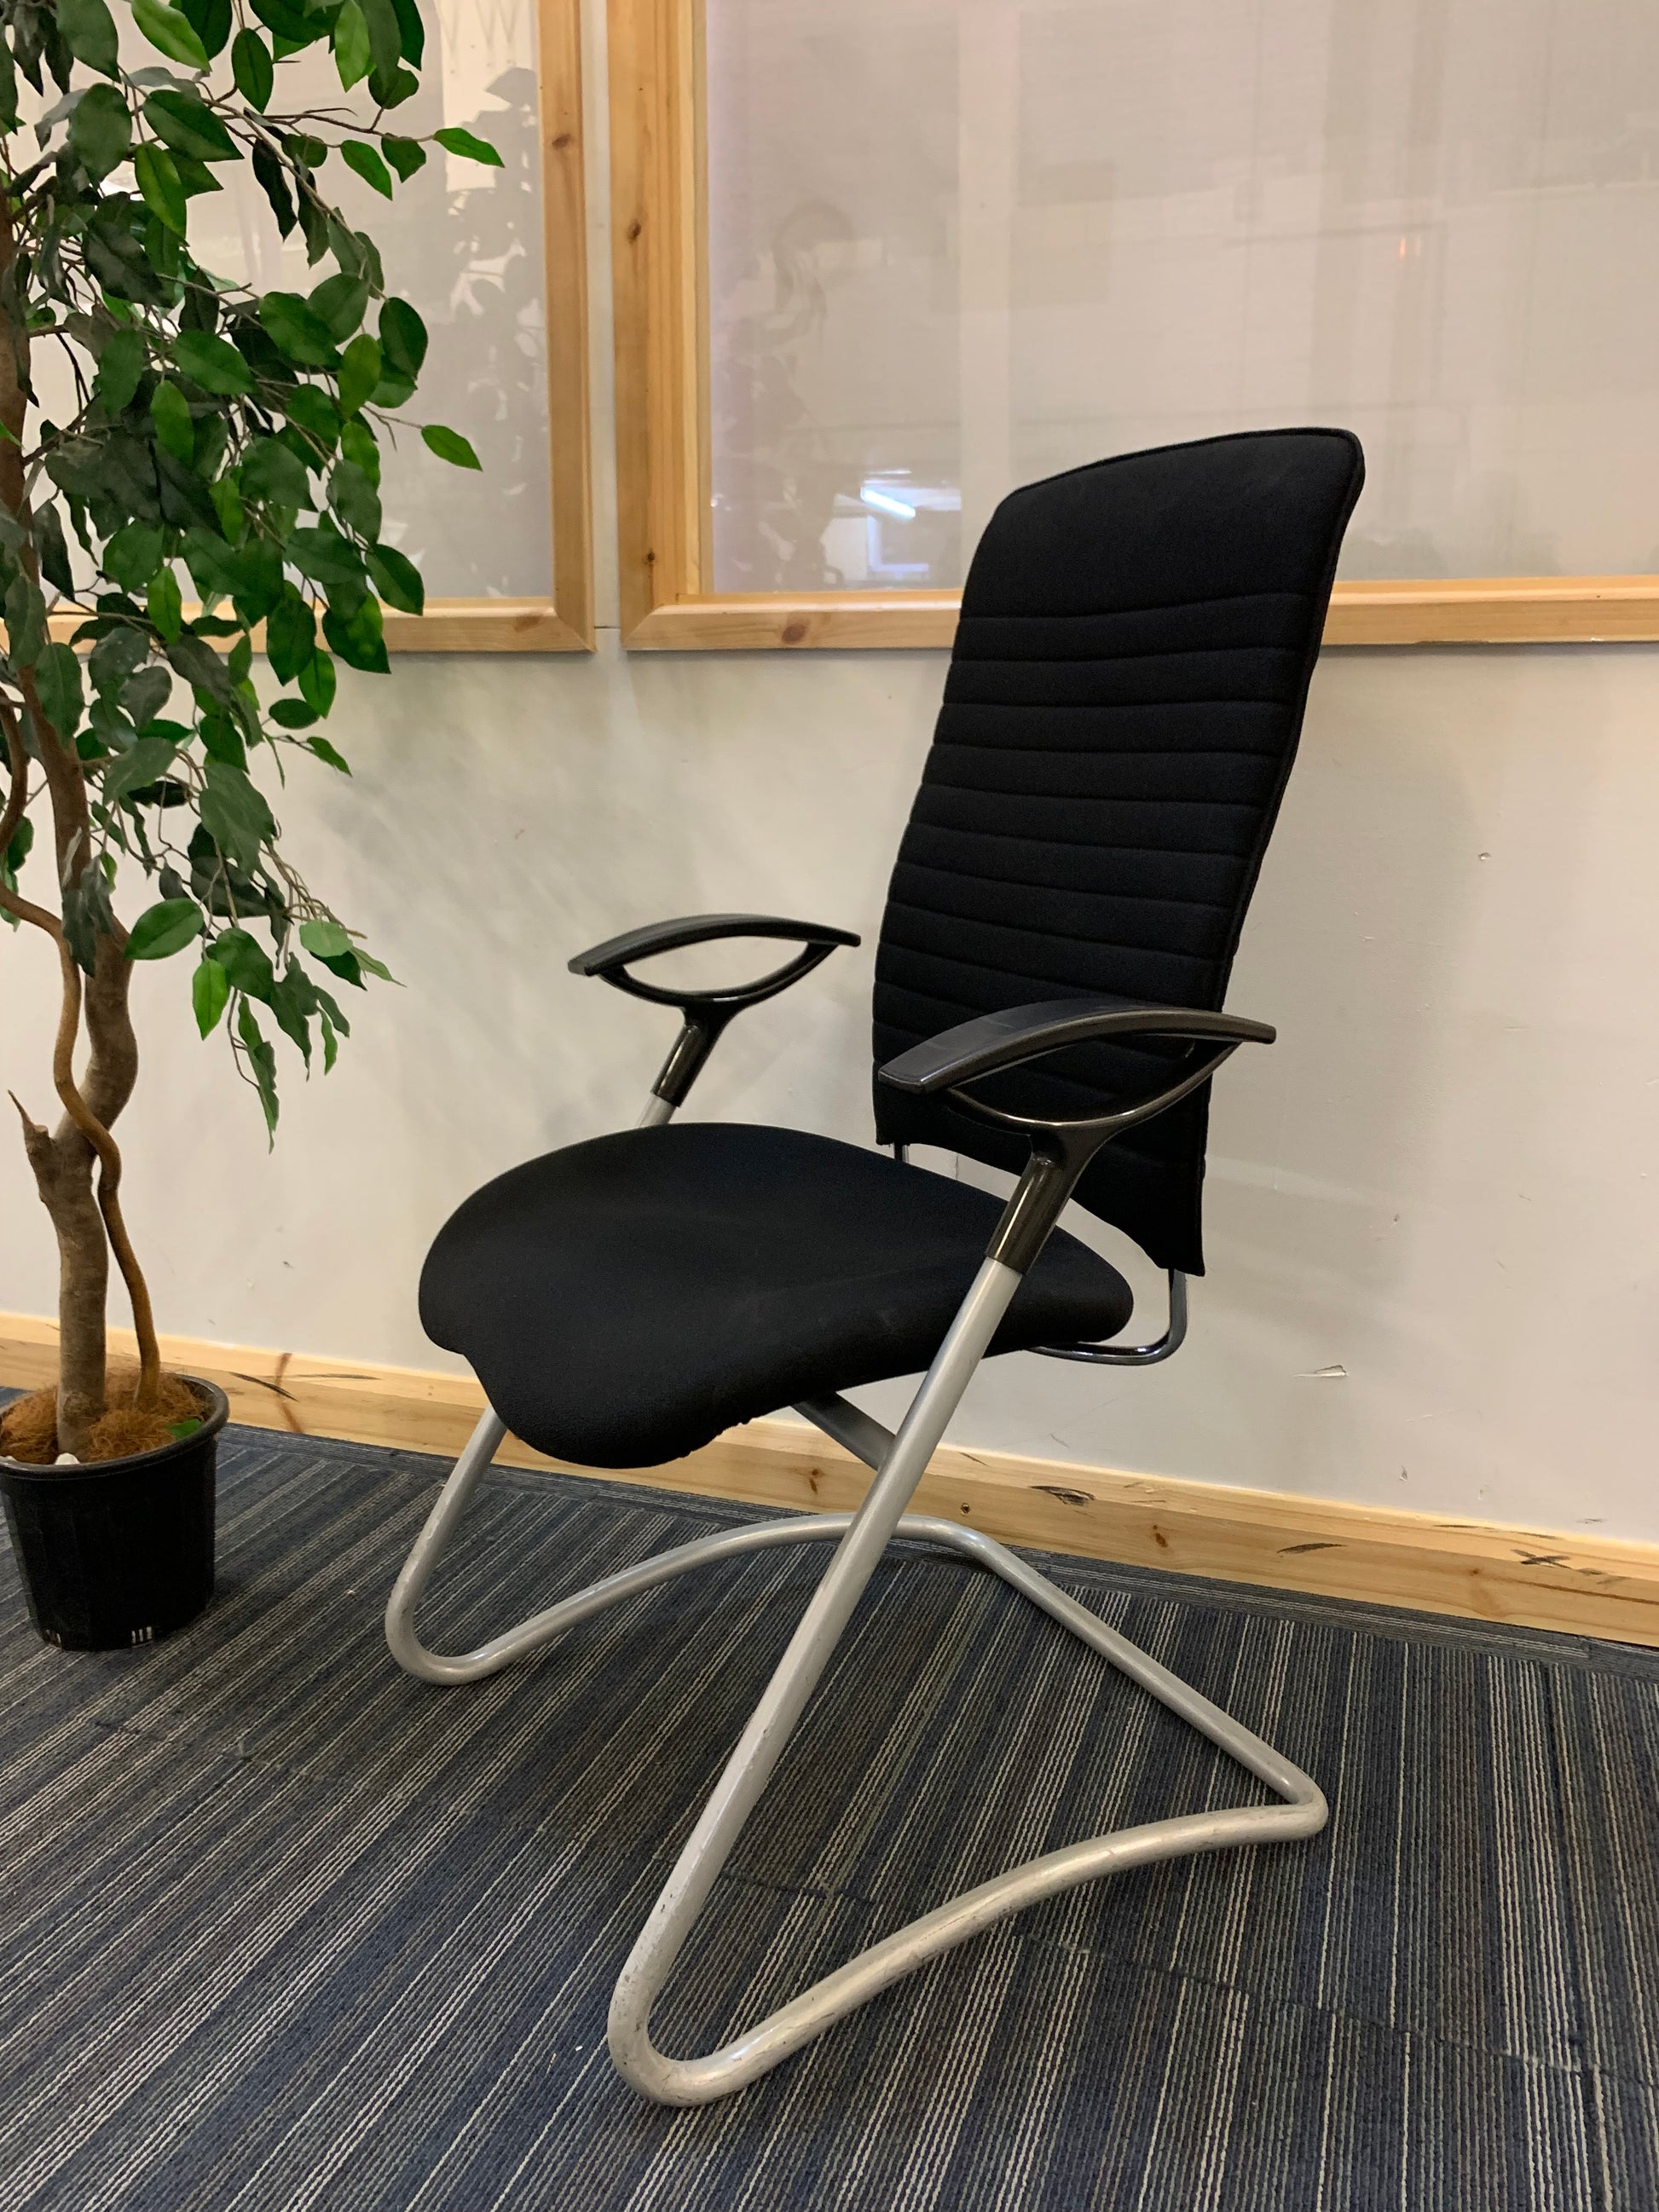 Black Sitland cantilever chair, left, tall green plant